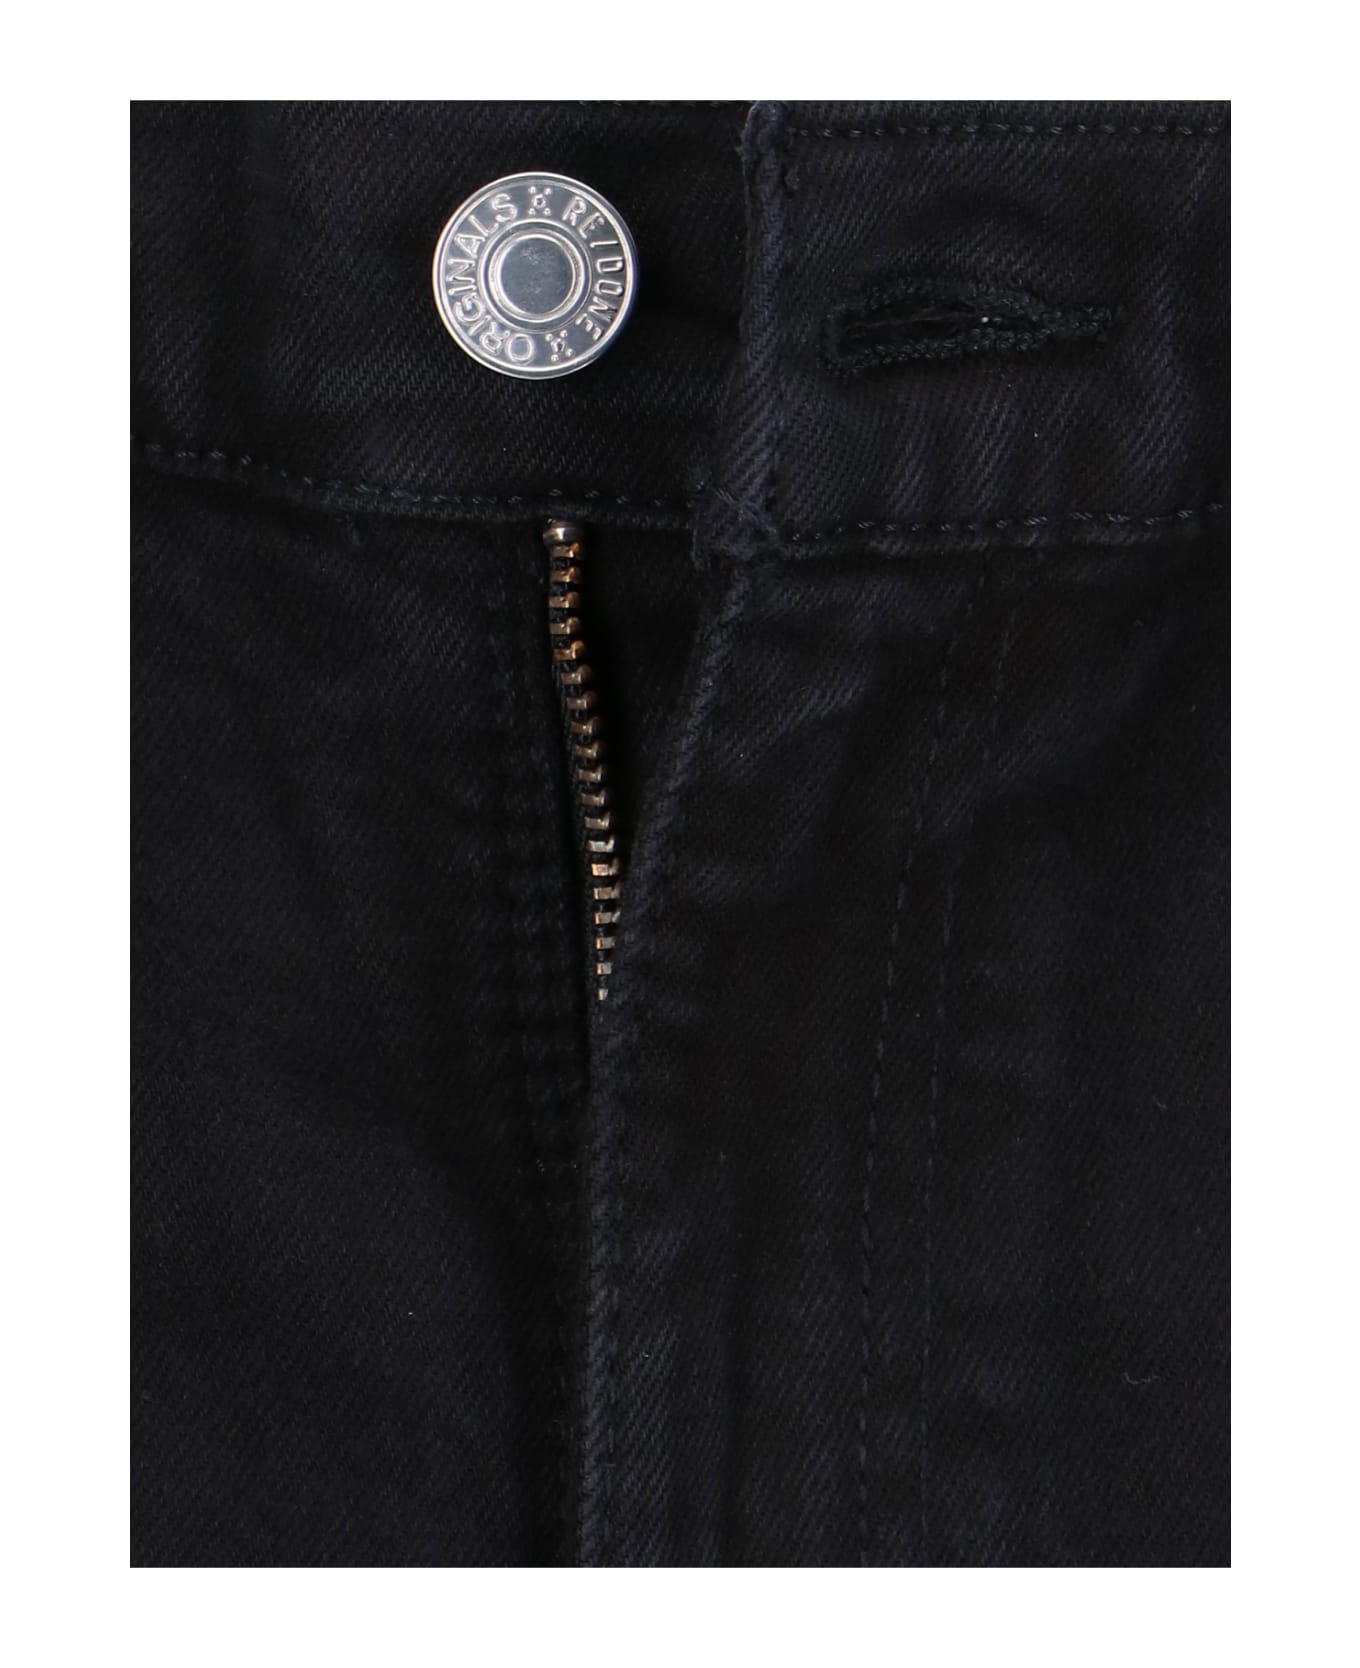 RE/DONE Jeans - Black